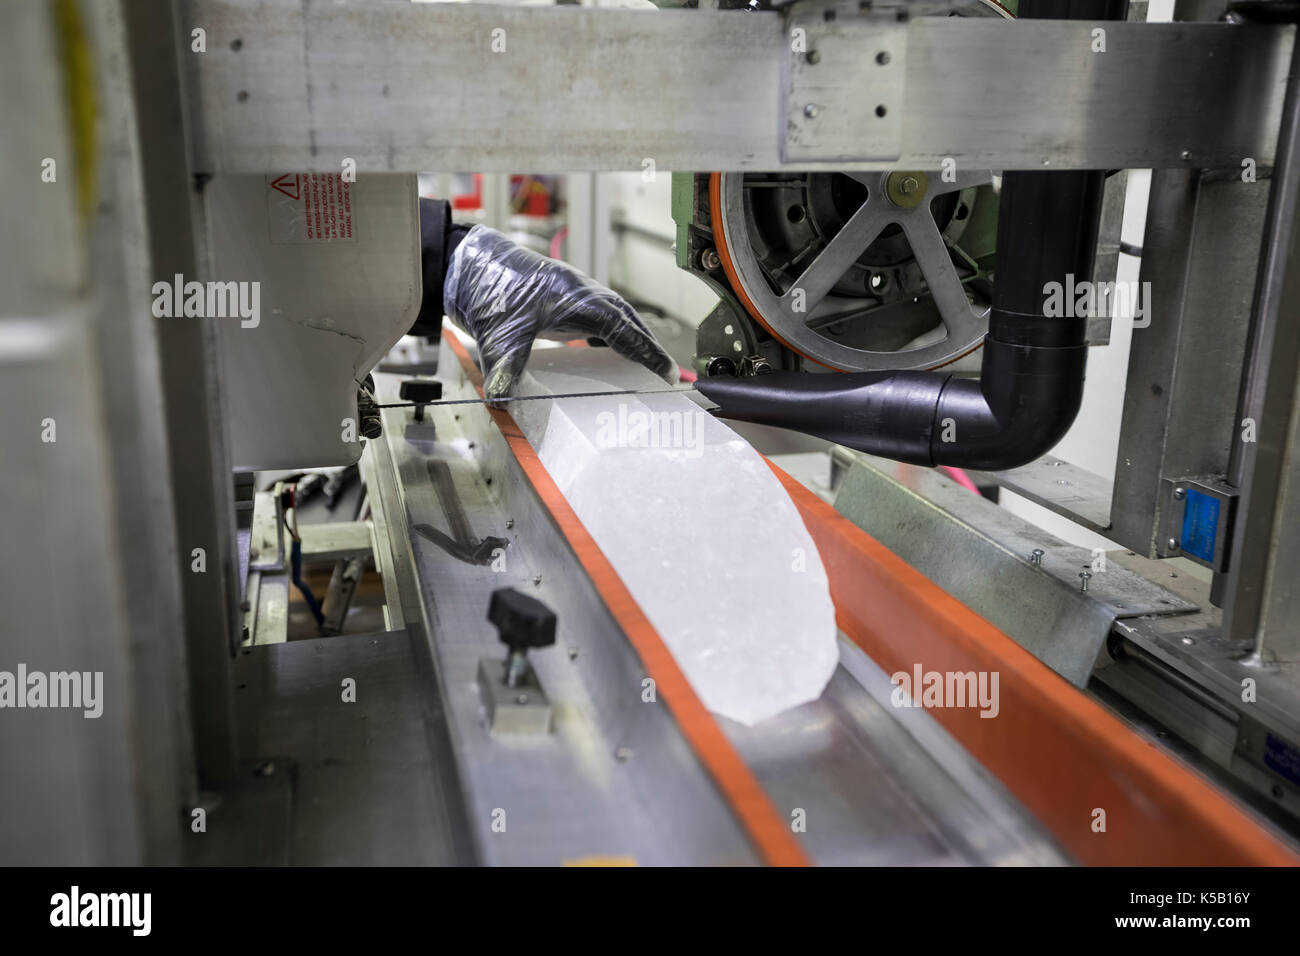 Denver, Colorado - An ice core from Greenland is prepared for cutting at the National Ice Core Laboratory. The lab stores 19,000 meters of ice cores f Stock Photo